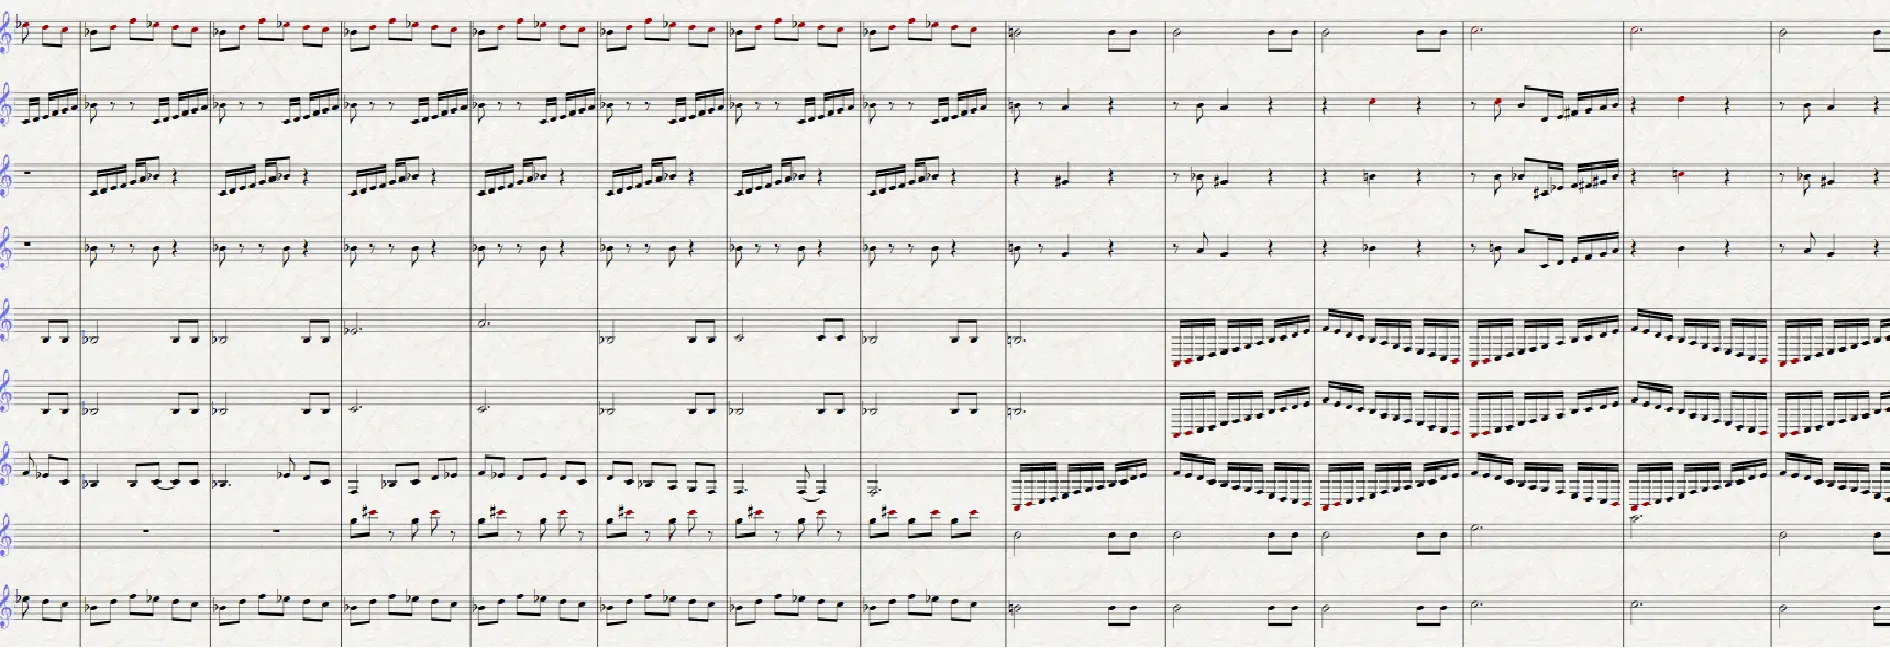 Score excerpt of The Masque of The Red Death